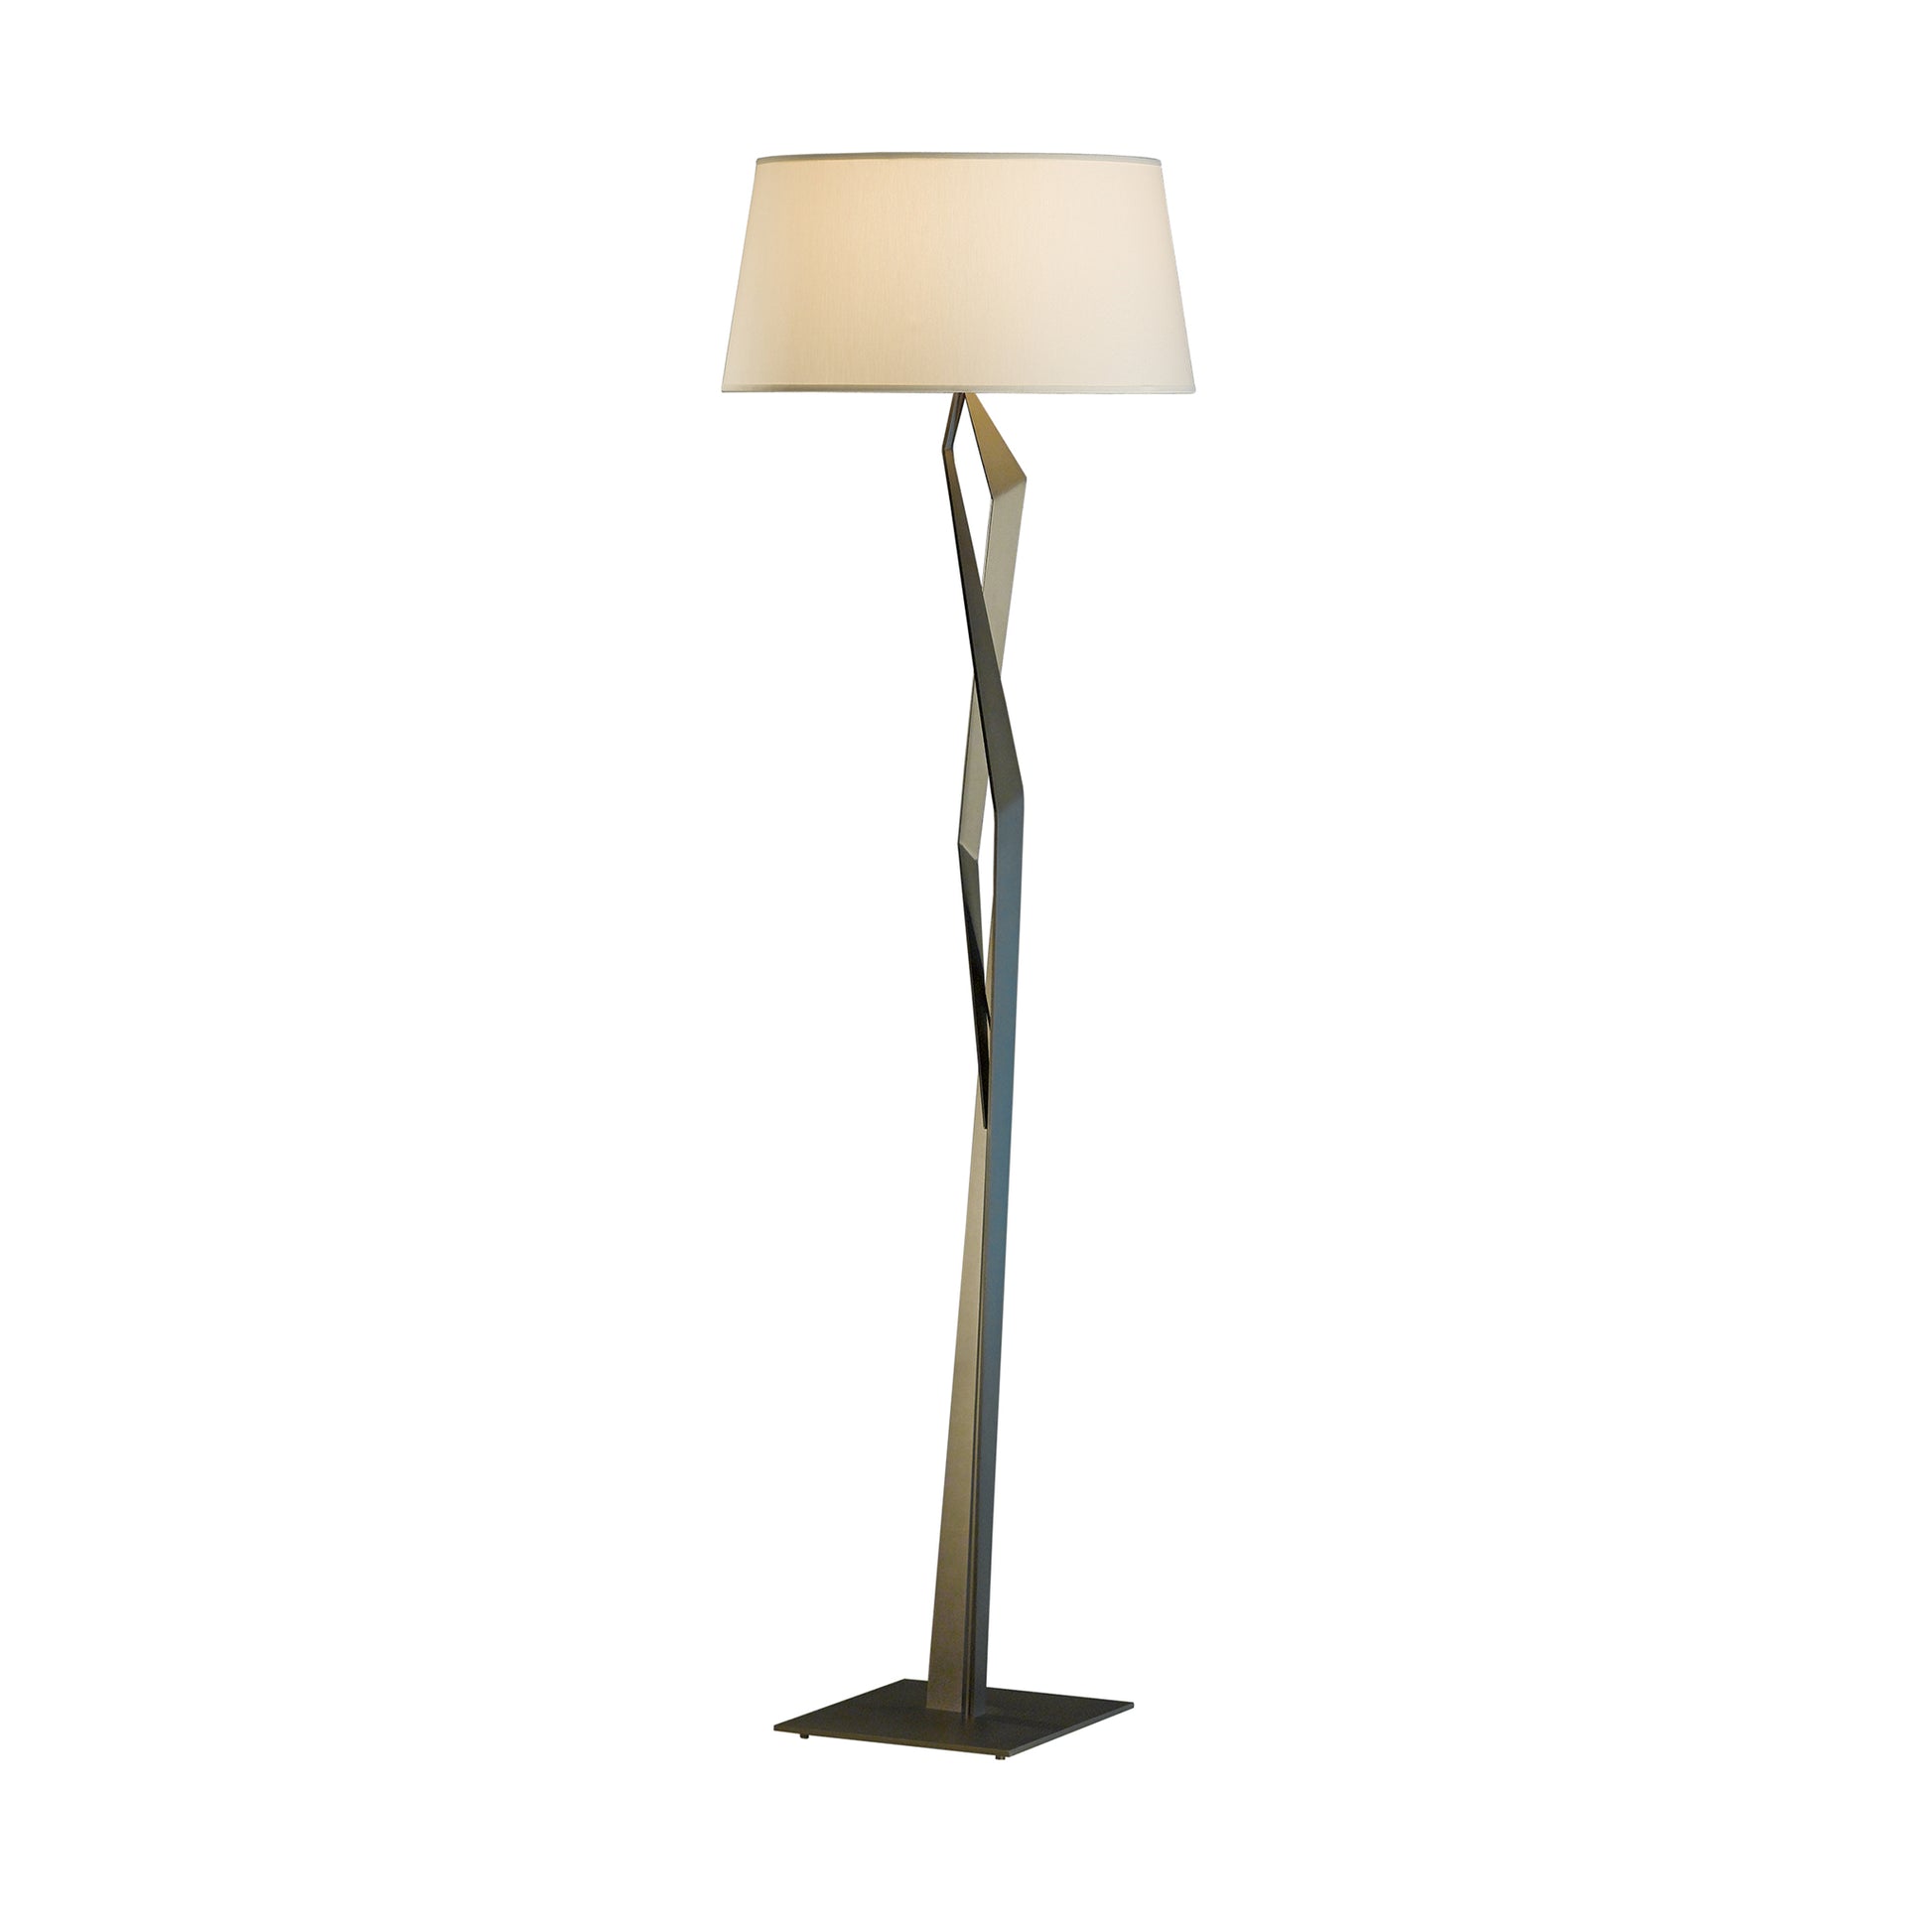 A modern Hubbardton Forge Facet Floor Lamp with a twisted metal base and a large, round beige lampshade, isolated on a white background.